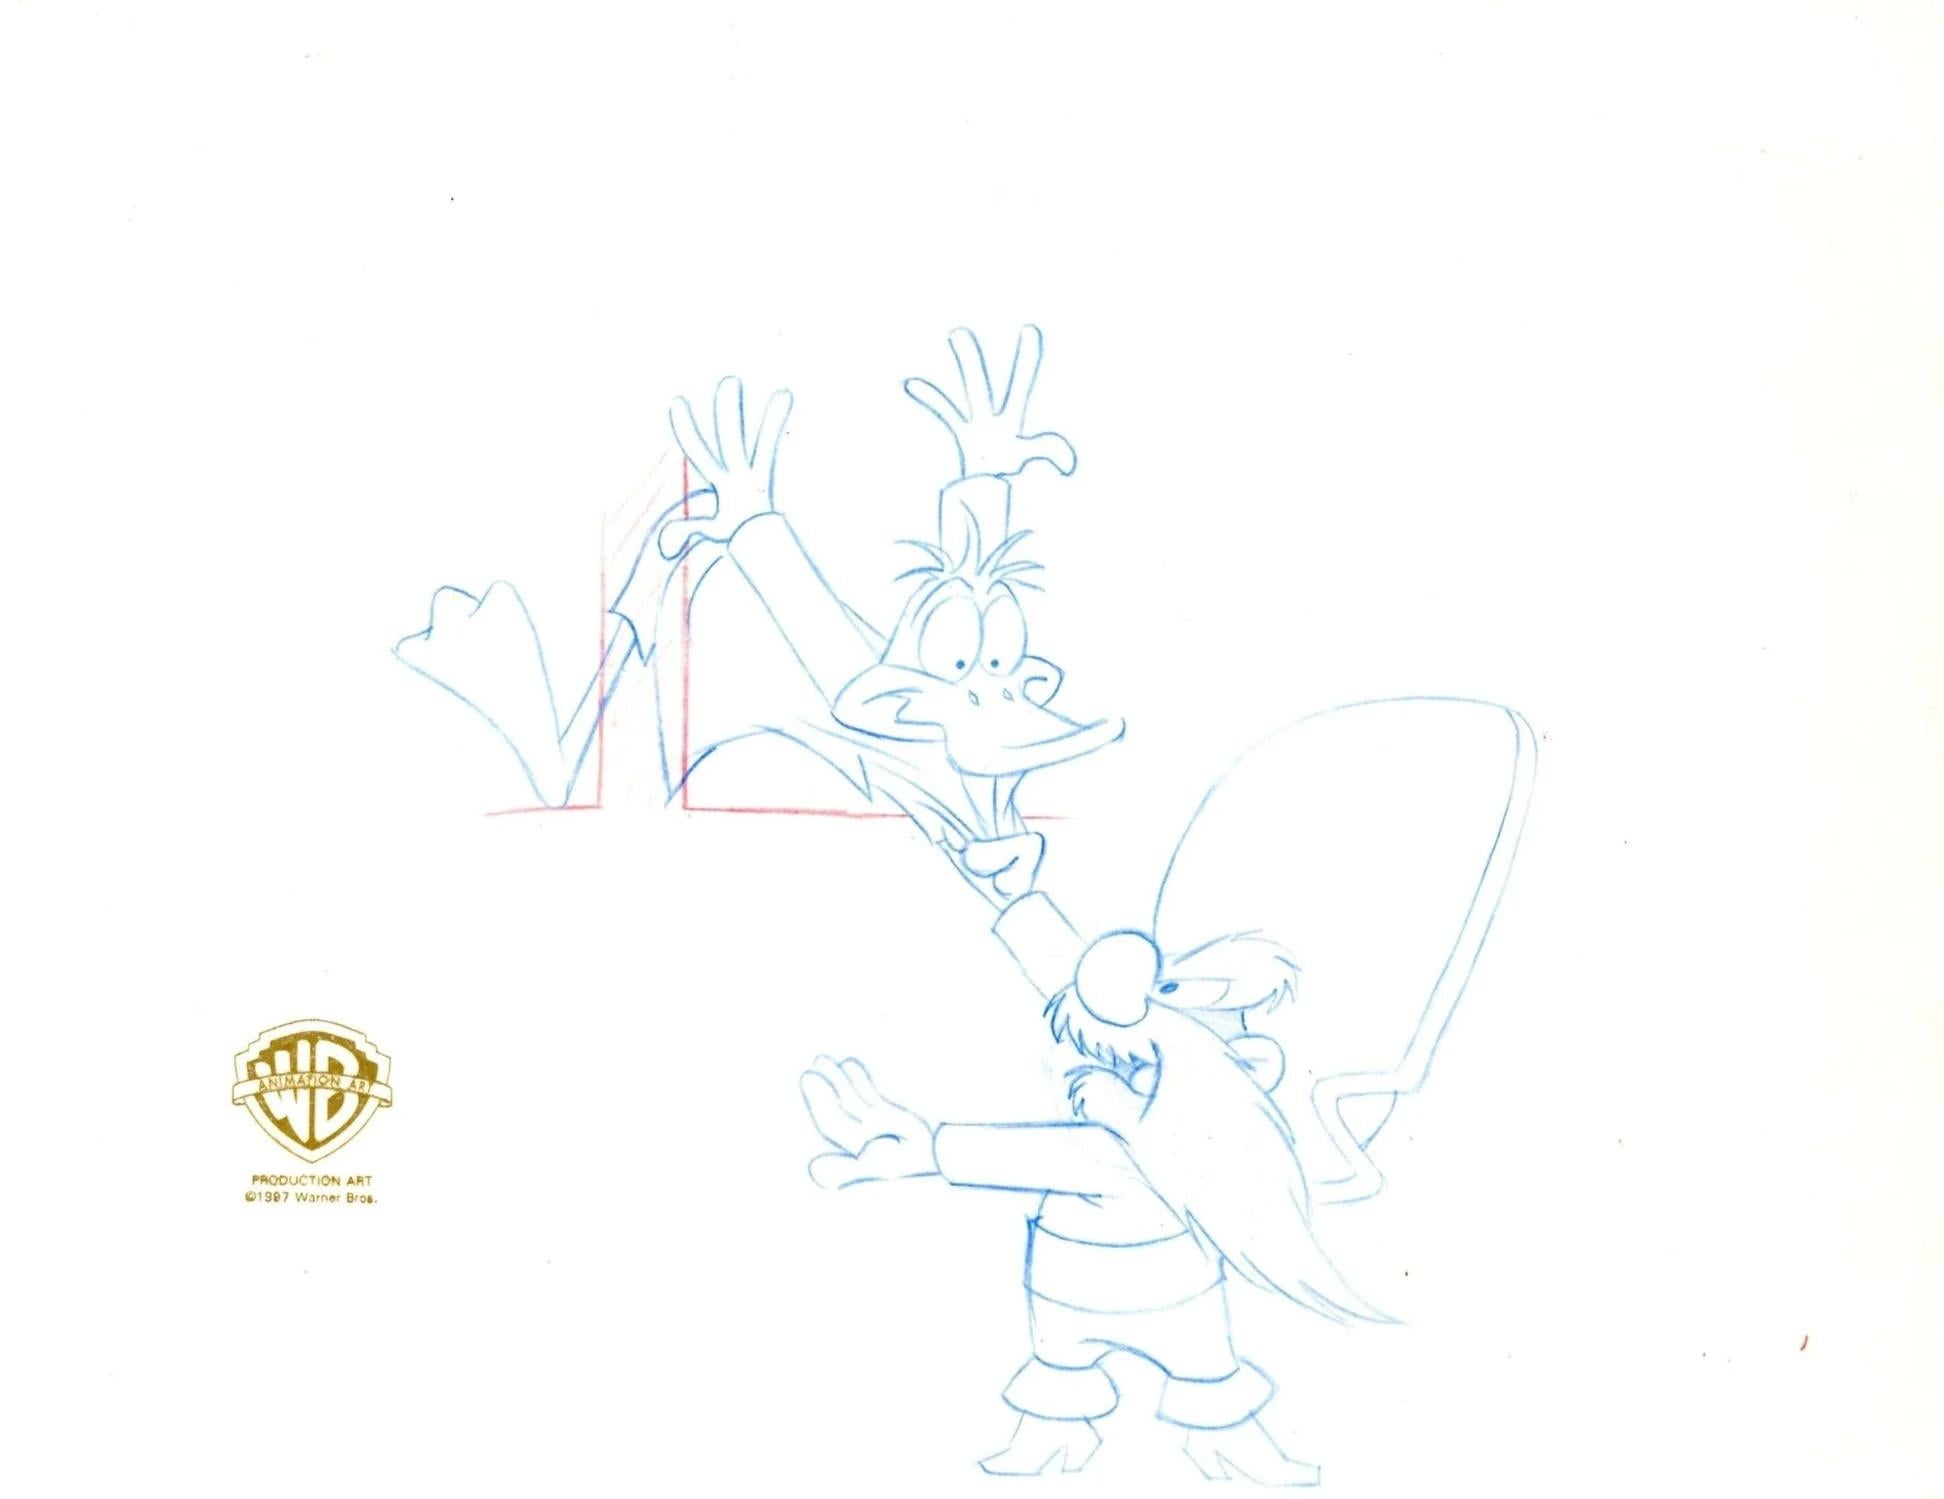 Looney Tunes Original Production Drawing: Daffy Duck and Yosemite Sam - Art by Looney Tunes Studio Artists